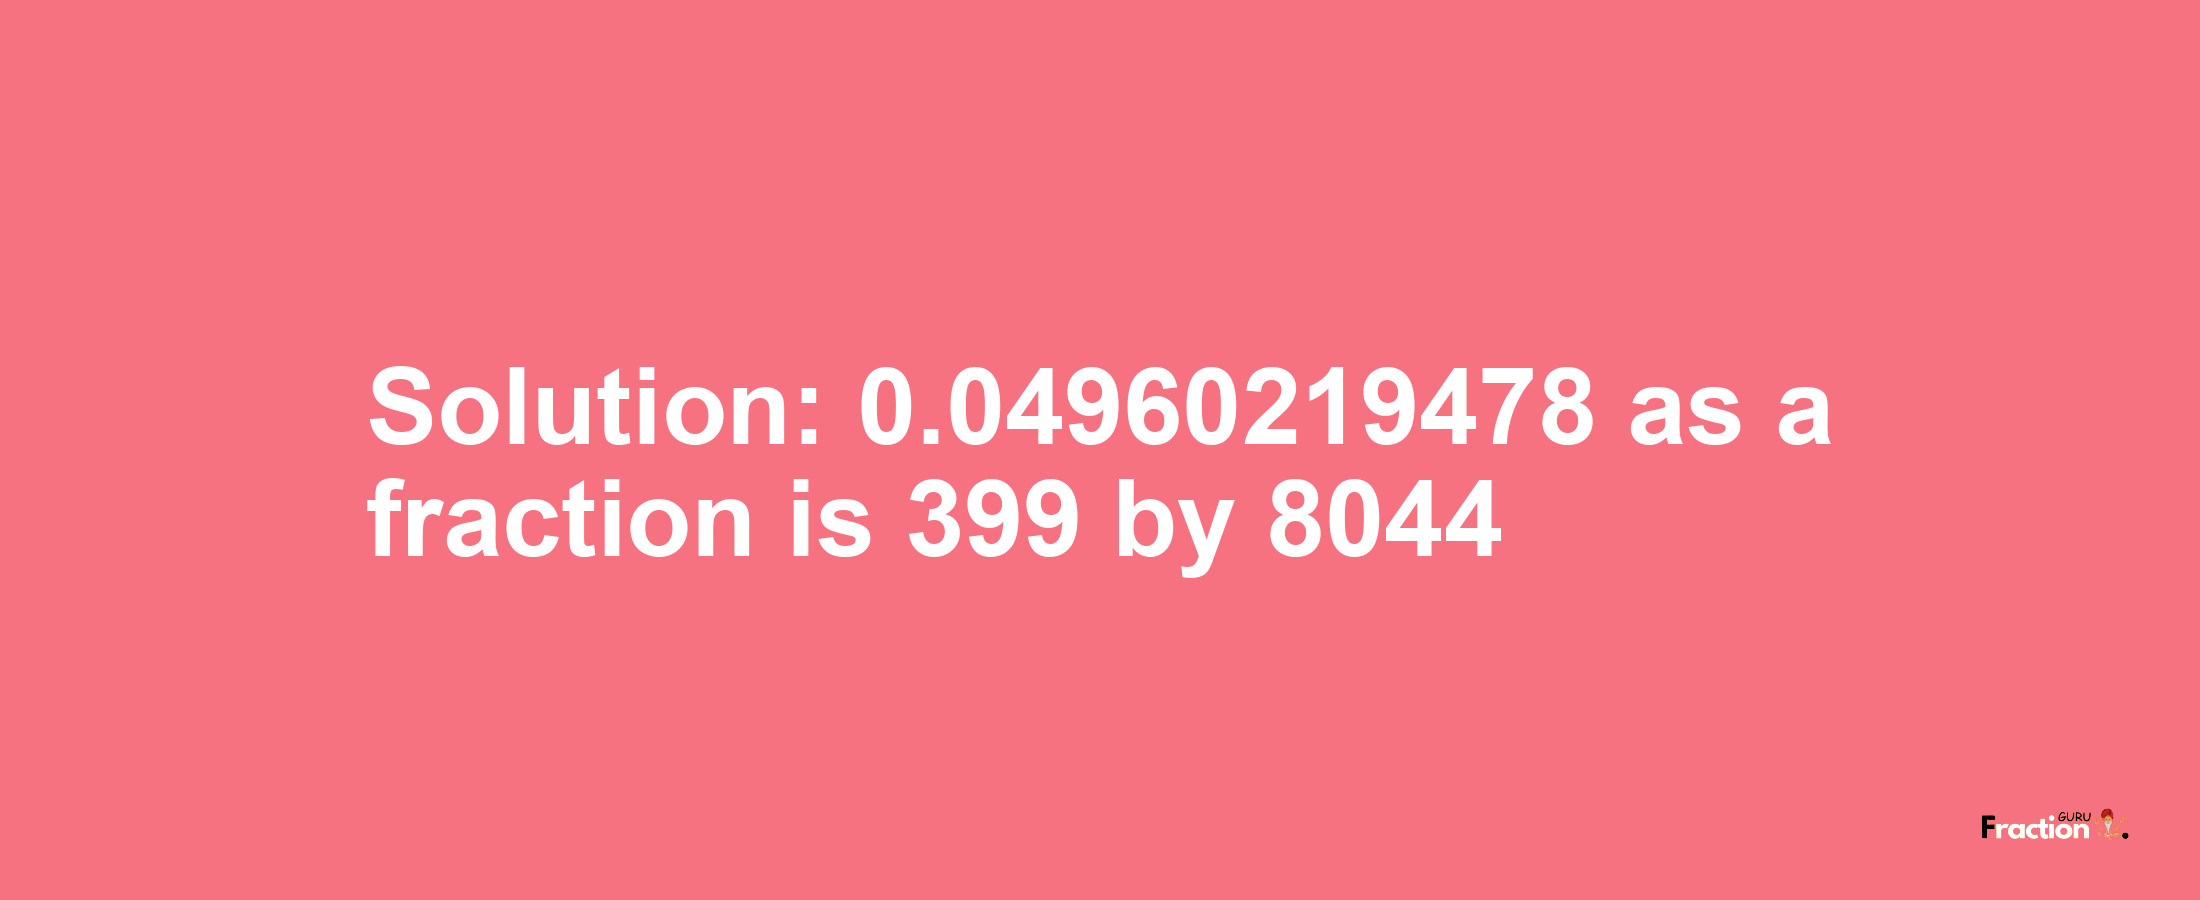 Solution:0.04960219478 as a fraction is 399/8044